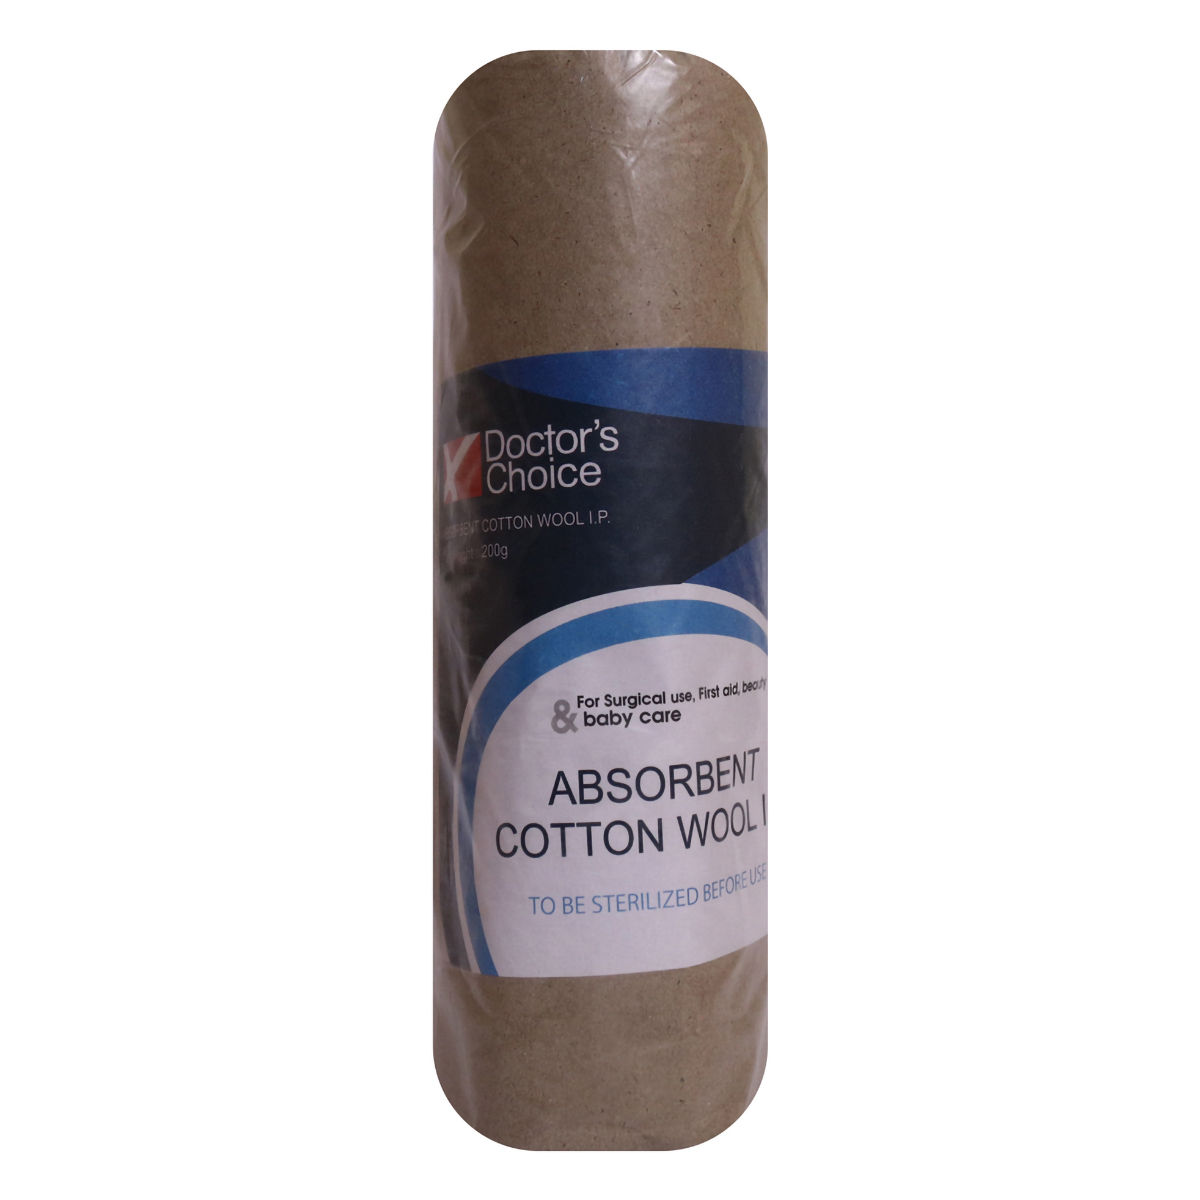 Buy Doctor's Choice Absorbent Cotton Wool I.P., 200 gm Online